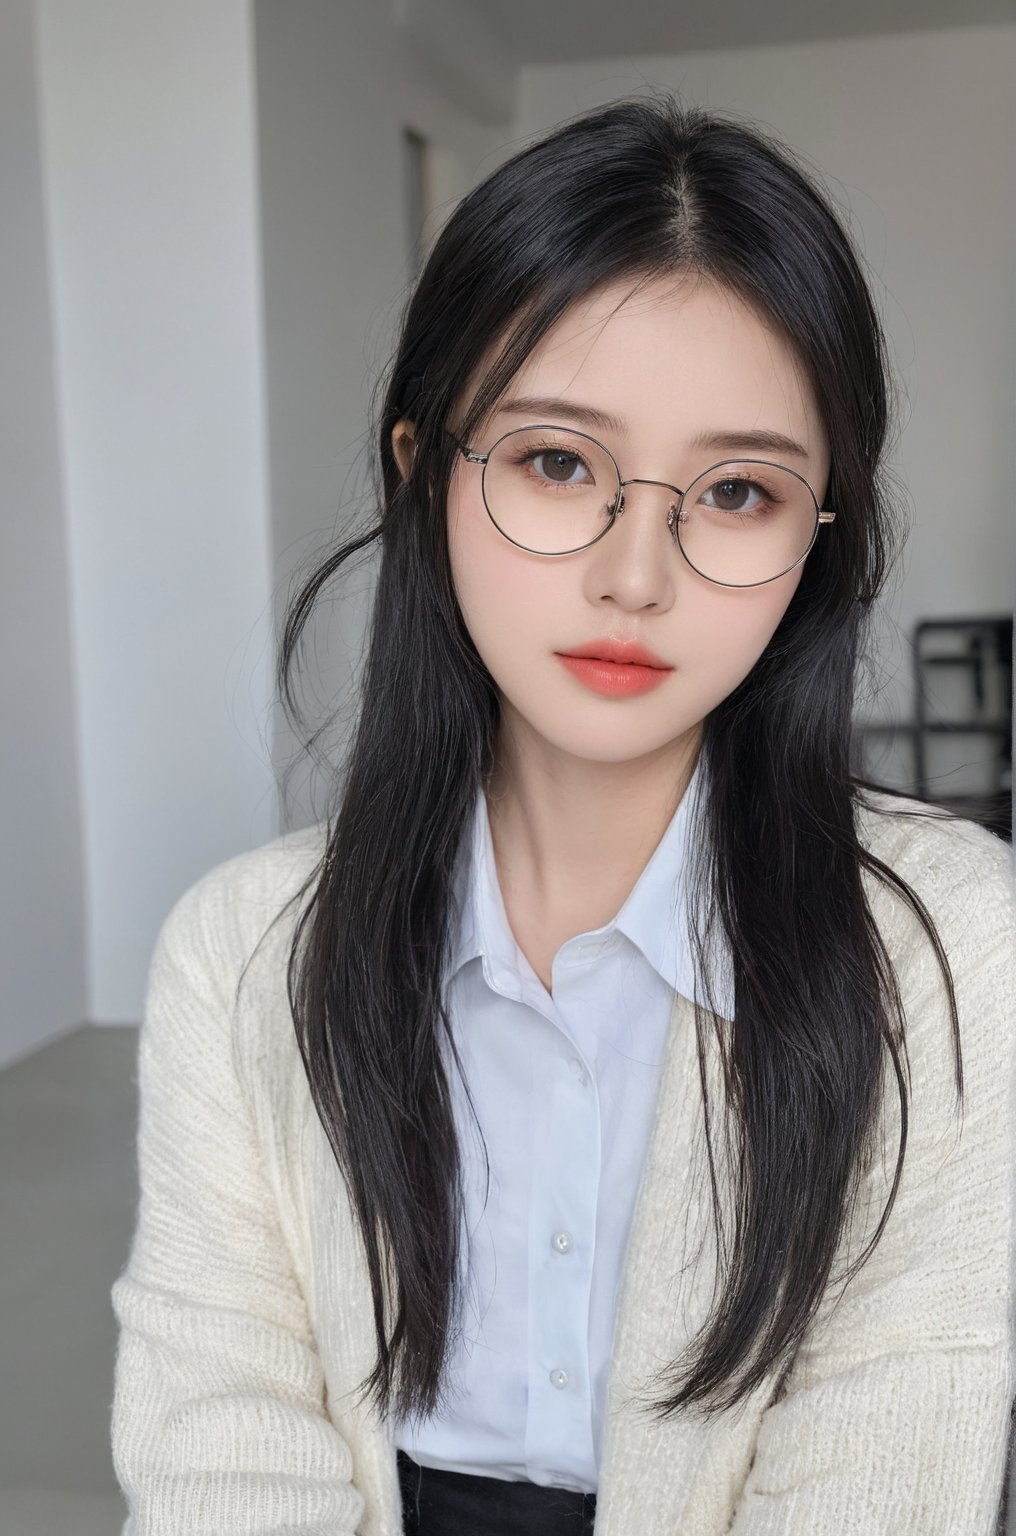 21 yo china instagram influencer, black hair, (wire rim glasses:1.4), black eyes, capture this image with a high resolution photograph using an 85mm lens for a flattering perspective